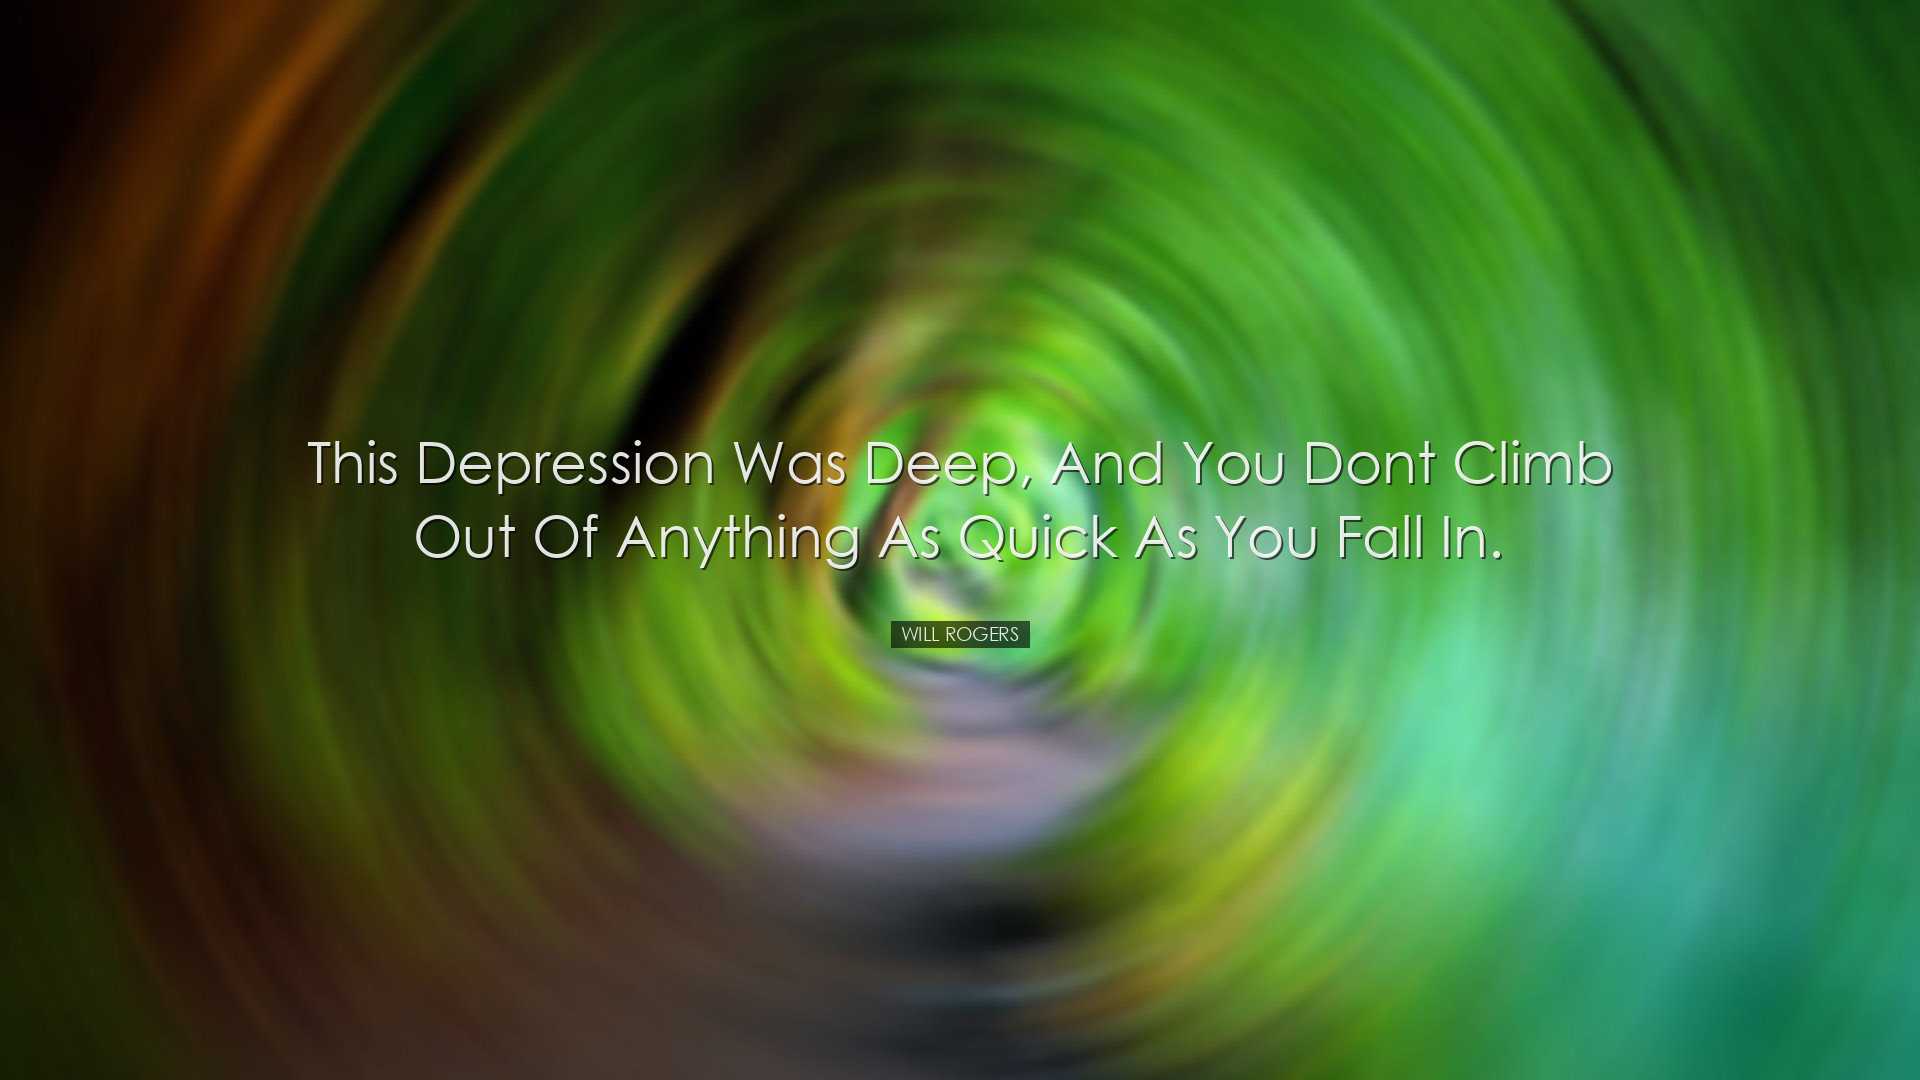 This depression was deep, and you dont climb out of anything as qu